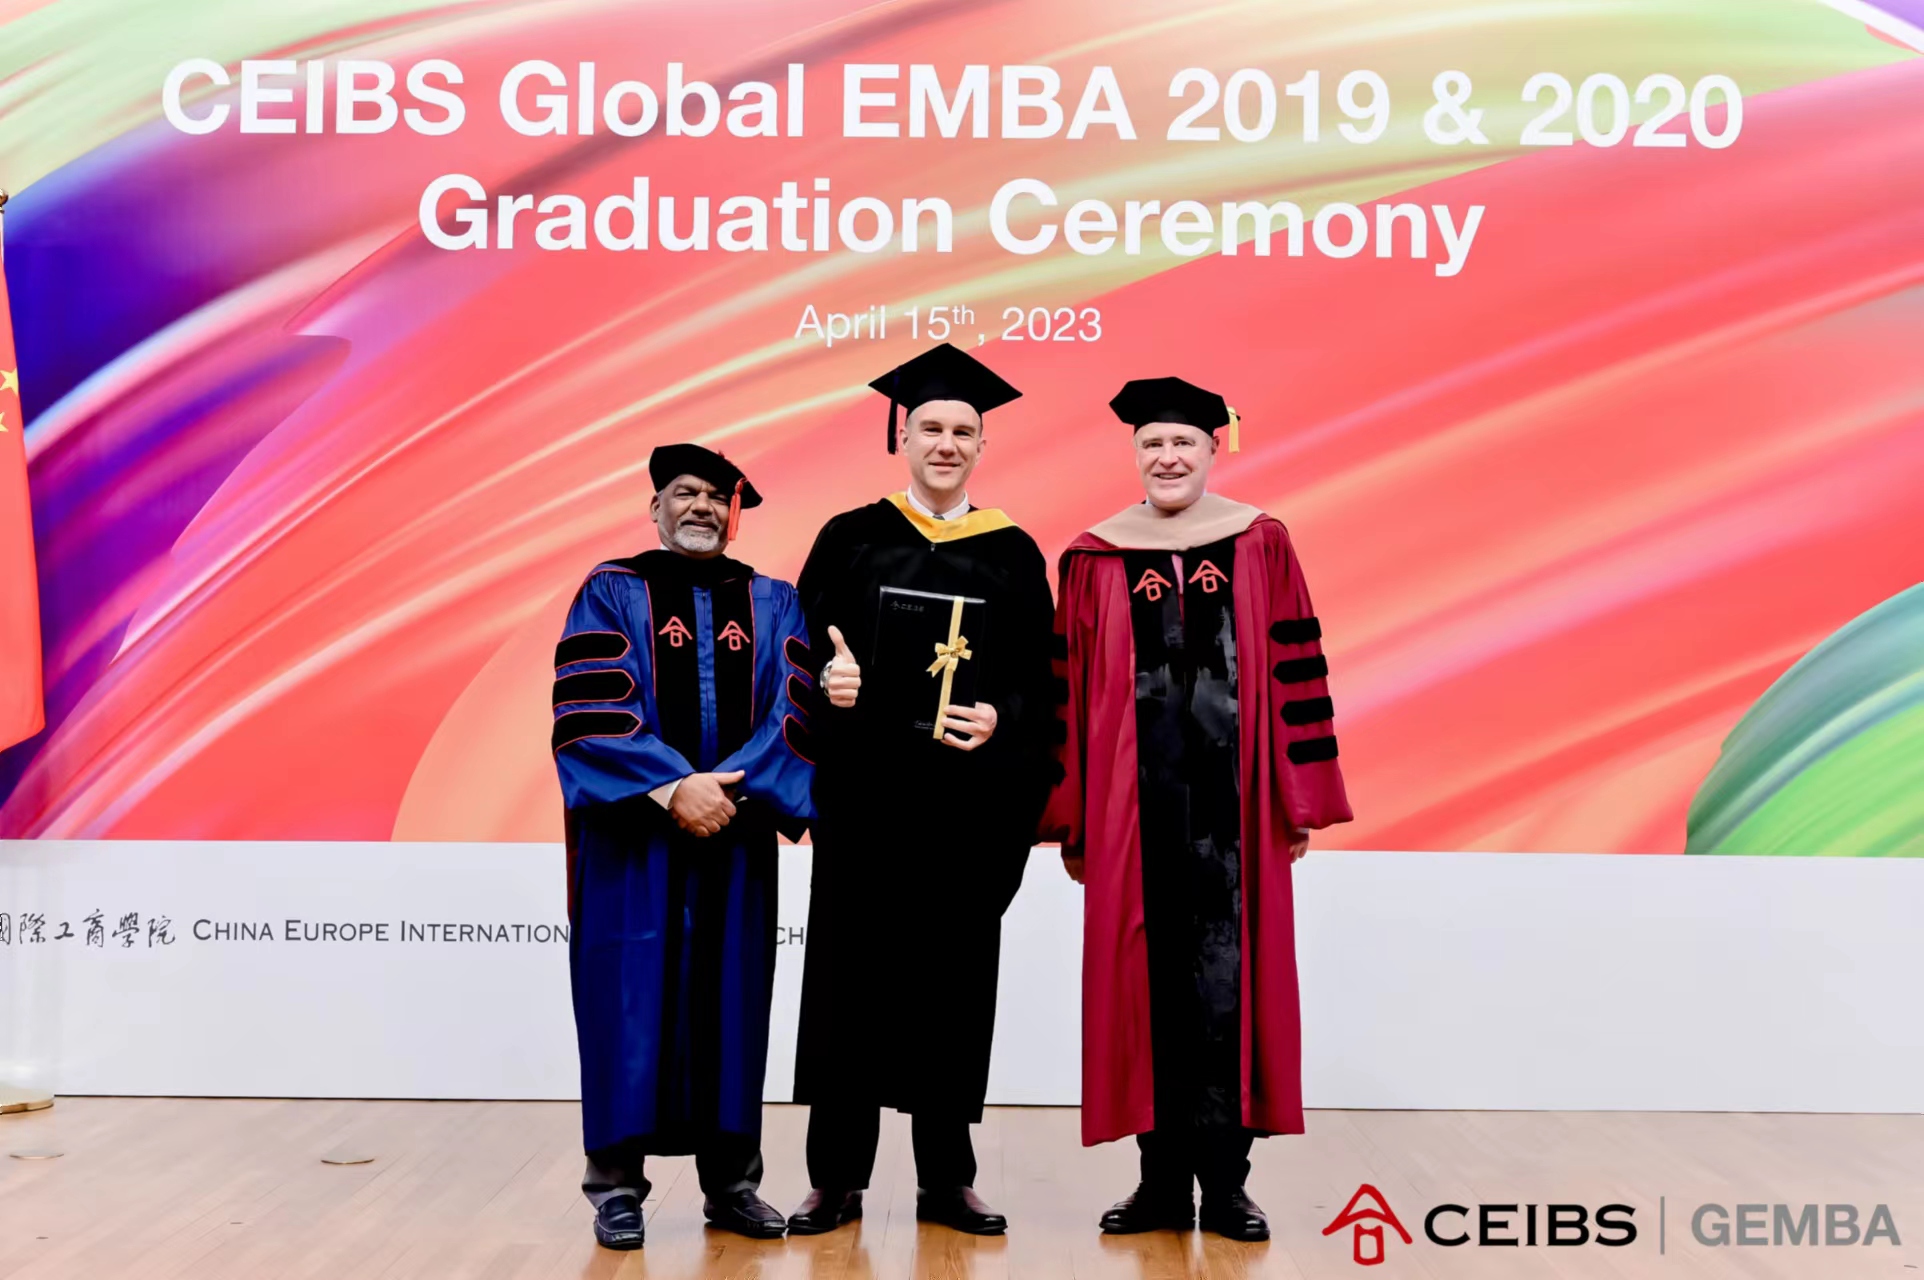 Andreas Hornfischer at Global EMBA 2020 graduation ceremony